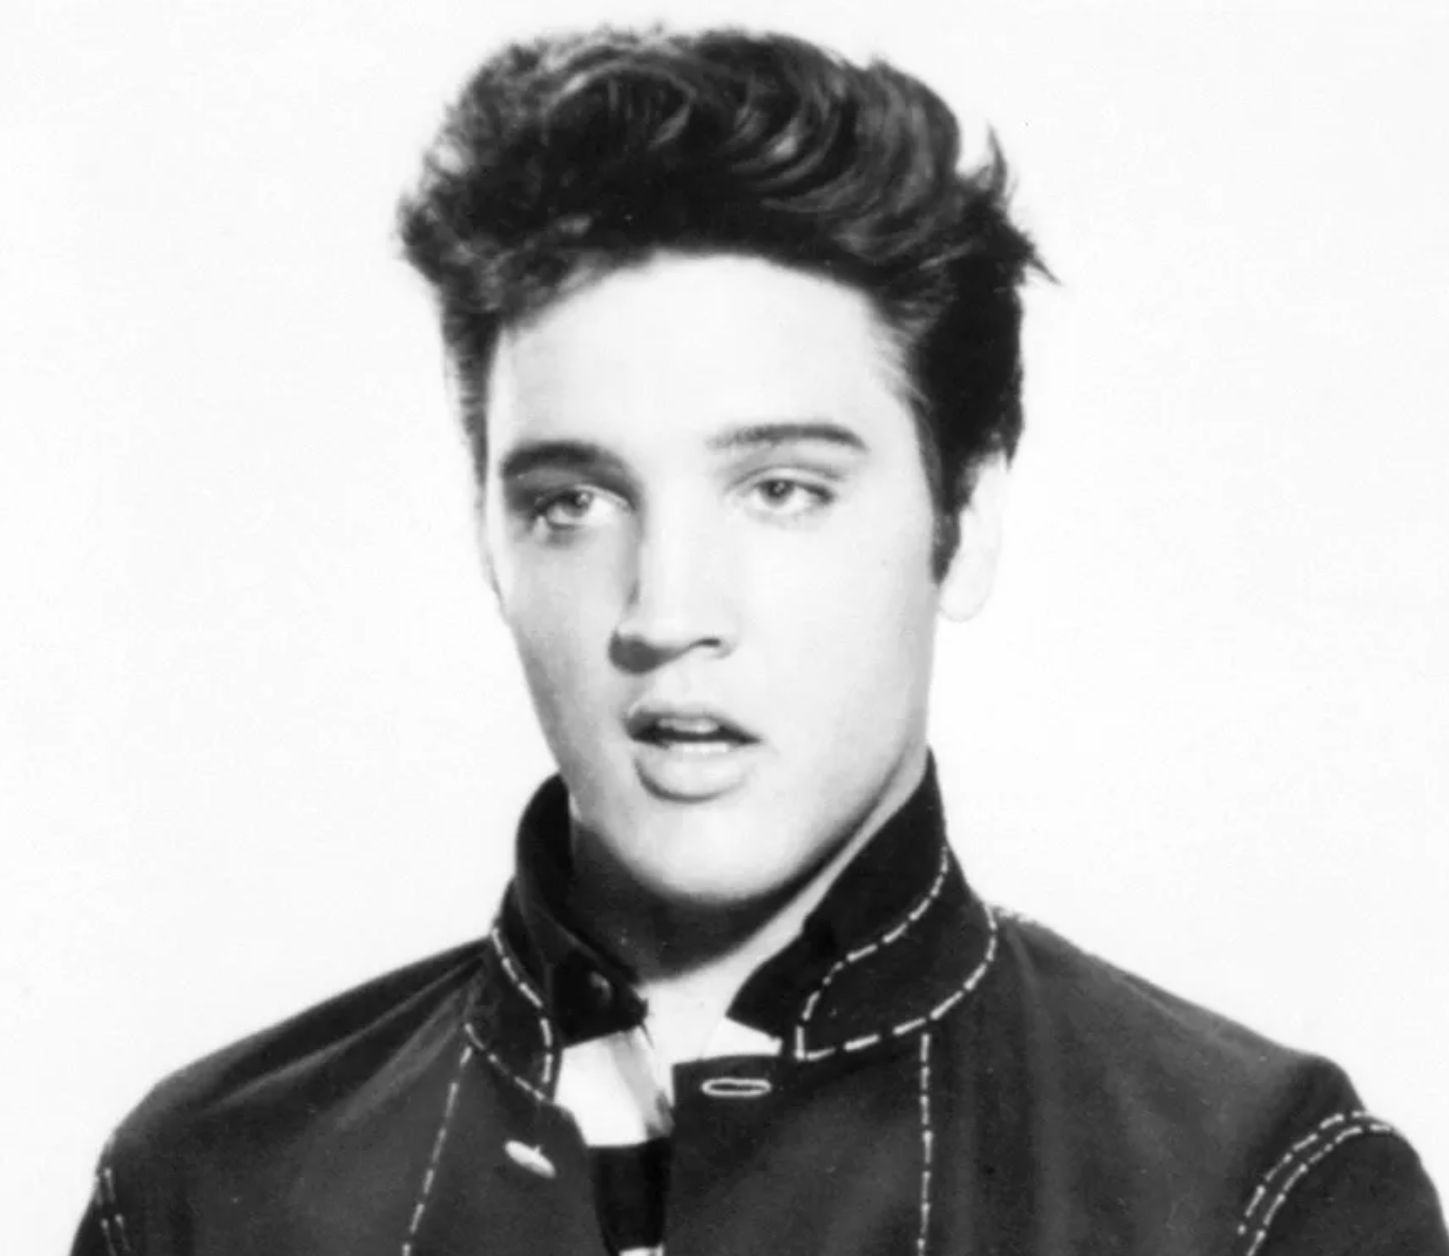  Photo of Elvis Presley, published by the Smithsonian Magazine, 1/10/2014 